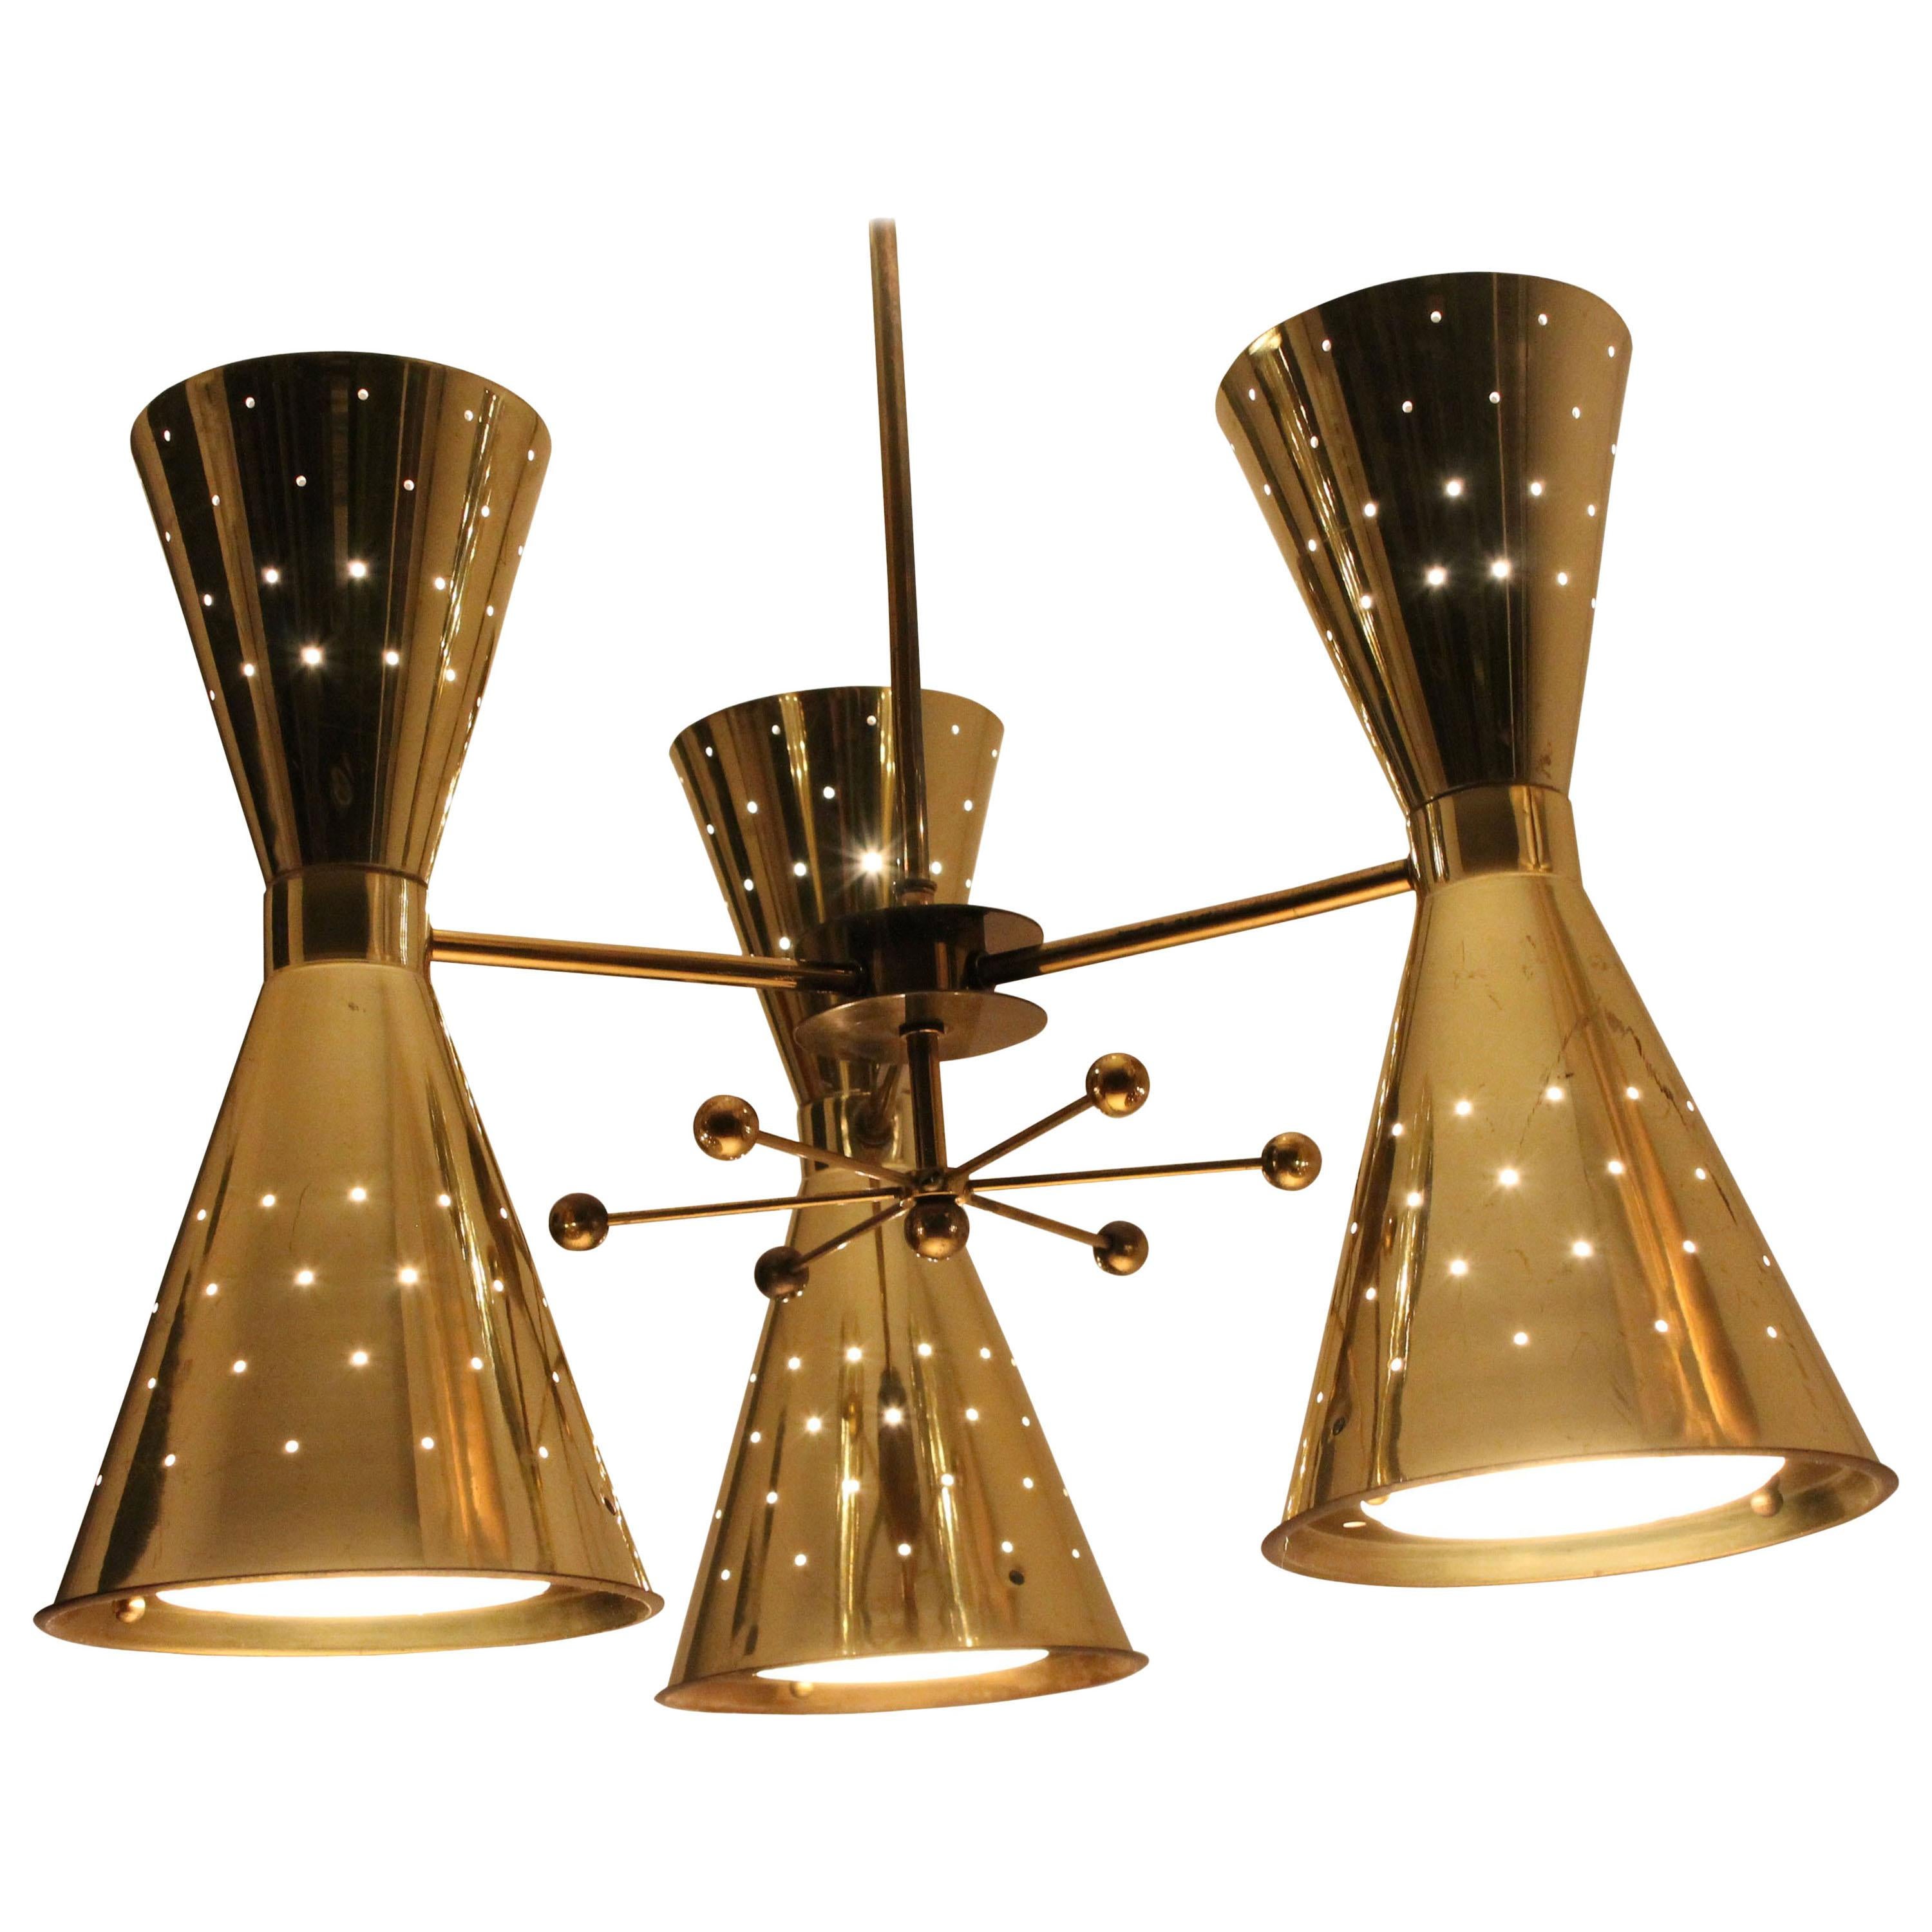 1950s Diabolo, Hourglass Pierced Brass-Plated Chandelier with Glass Lens 7